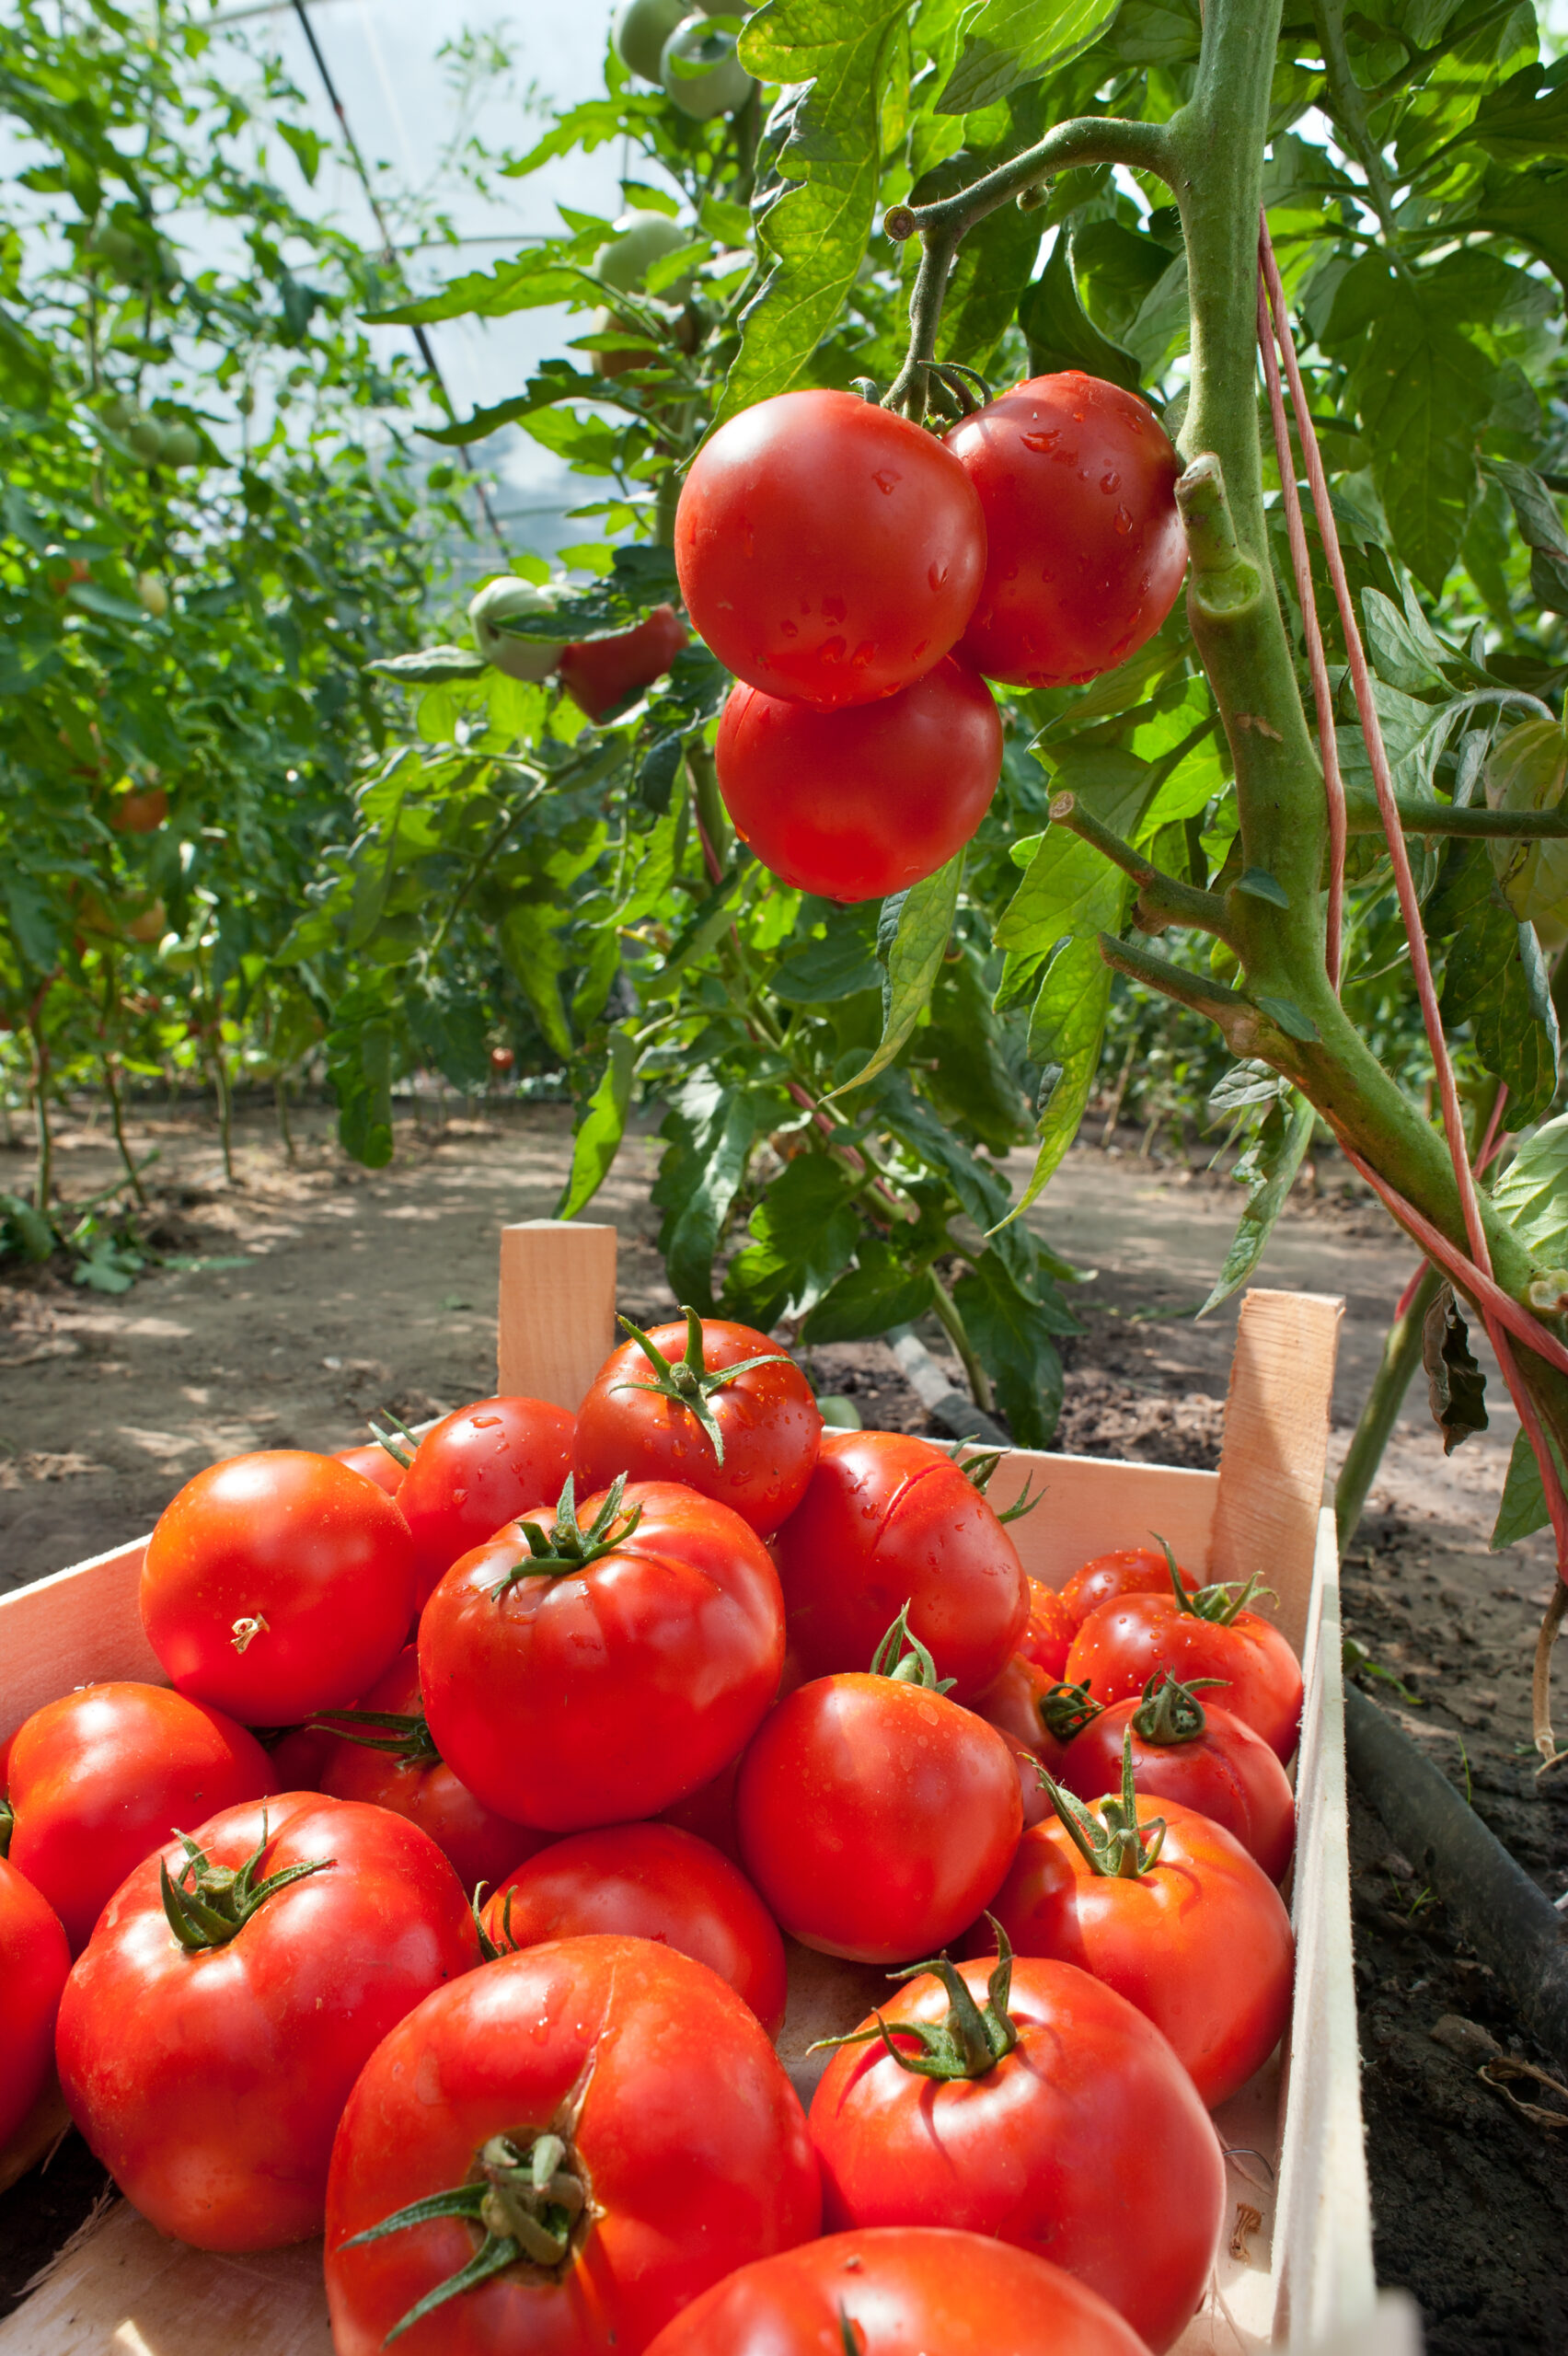 ripe tomatoes ready for picking - Want To Start Growing Your Own Food? The Best Plants To Start With